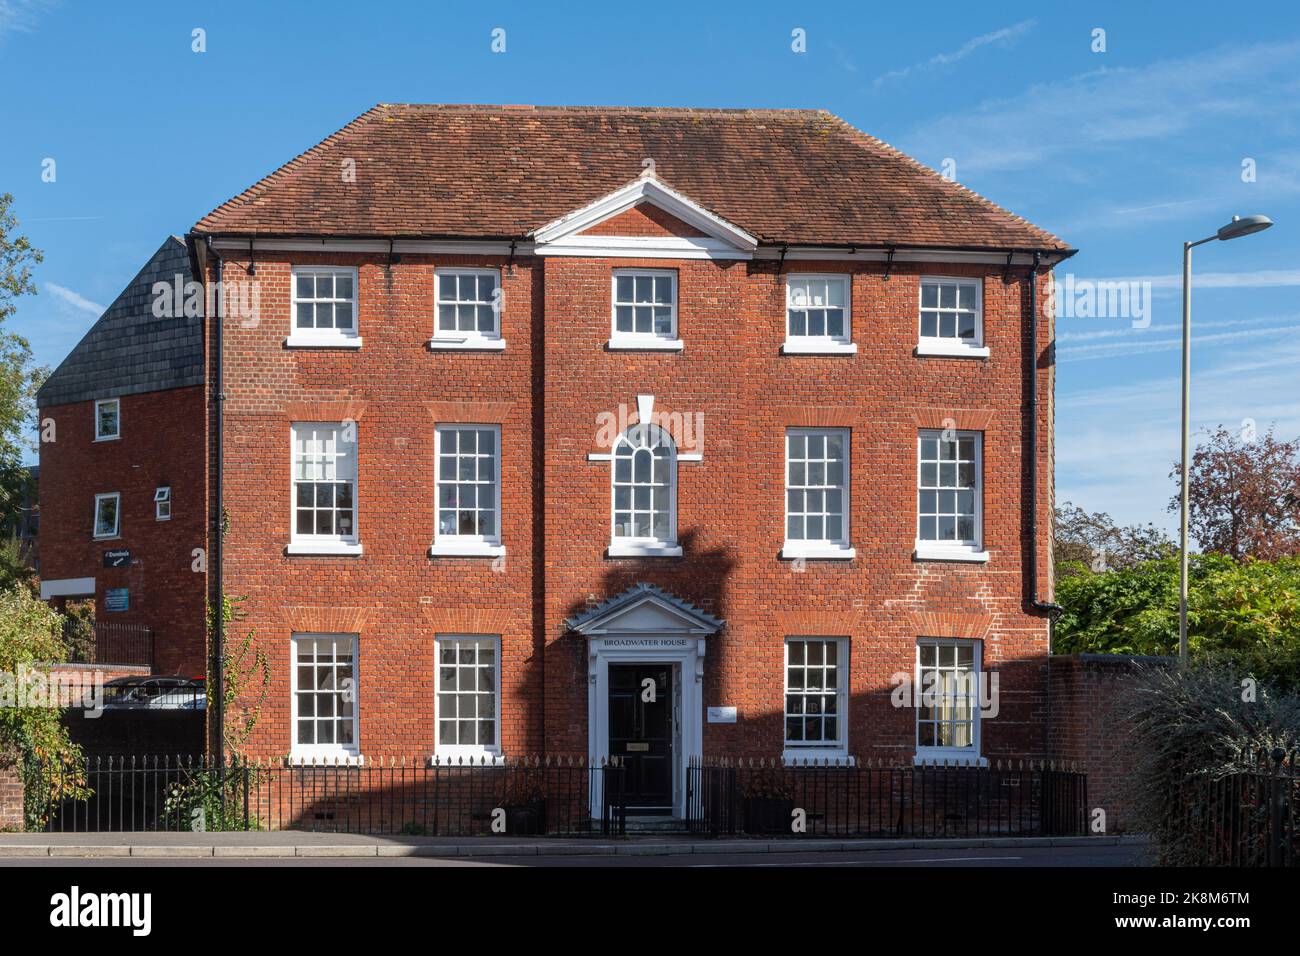 Broadwater House in Romsey, Hampshire, England, UK, a Grade II* listed building Stock Photo